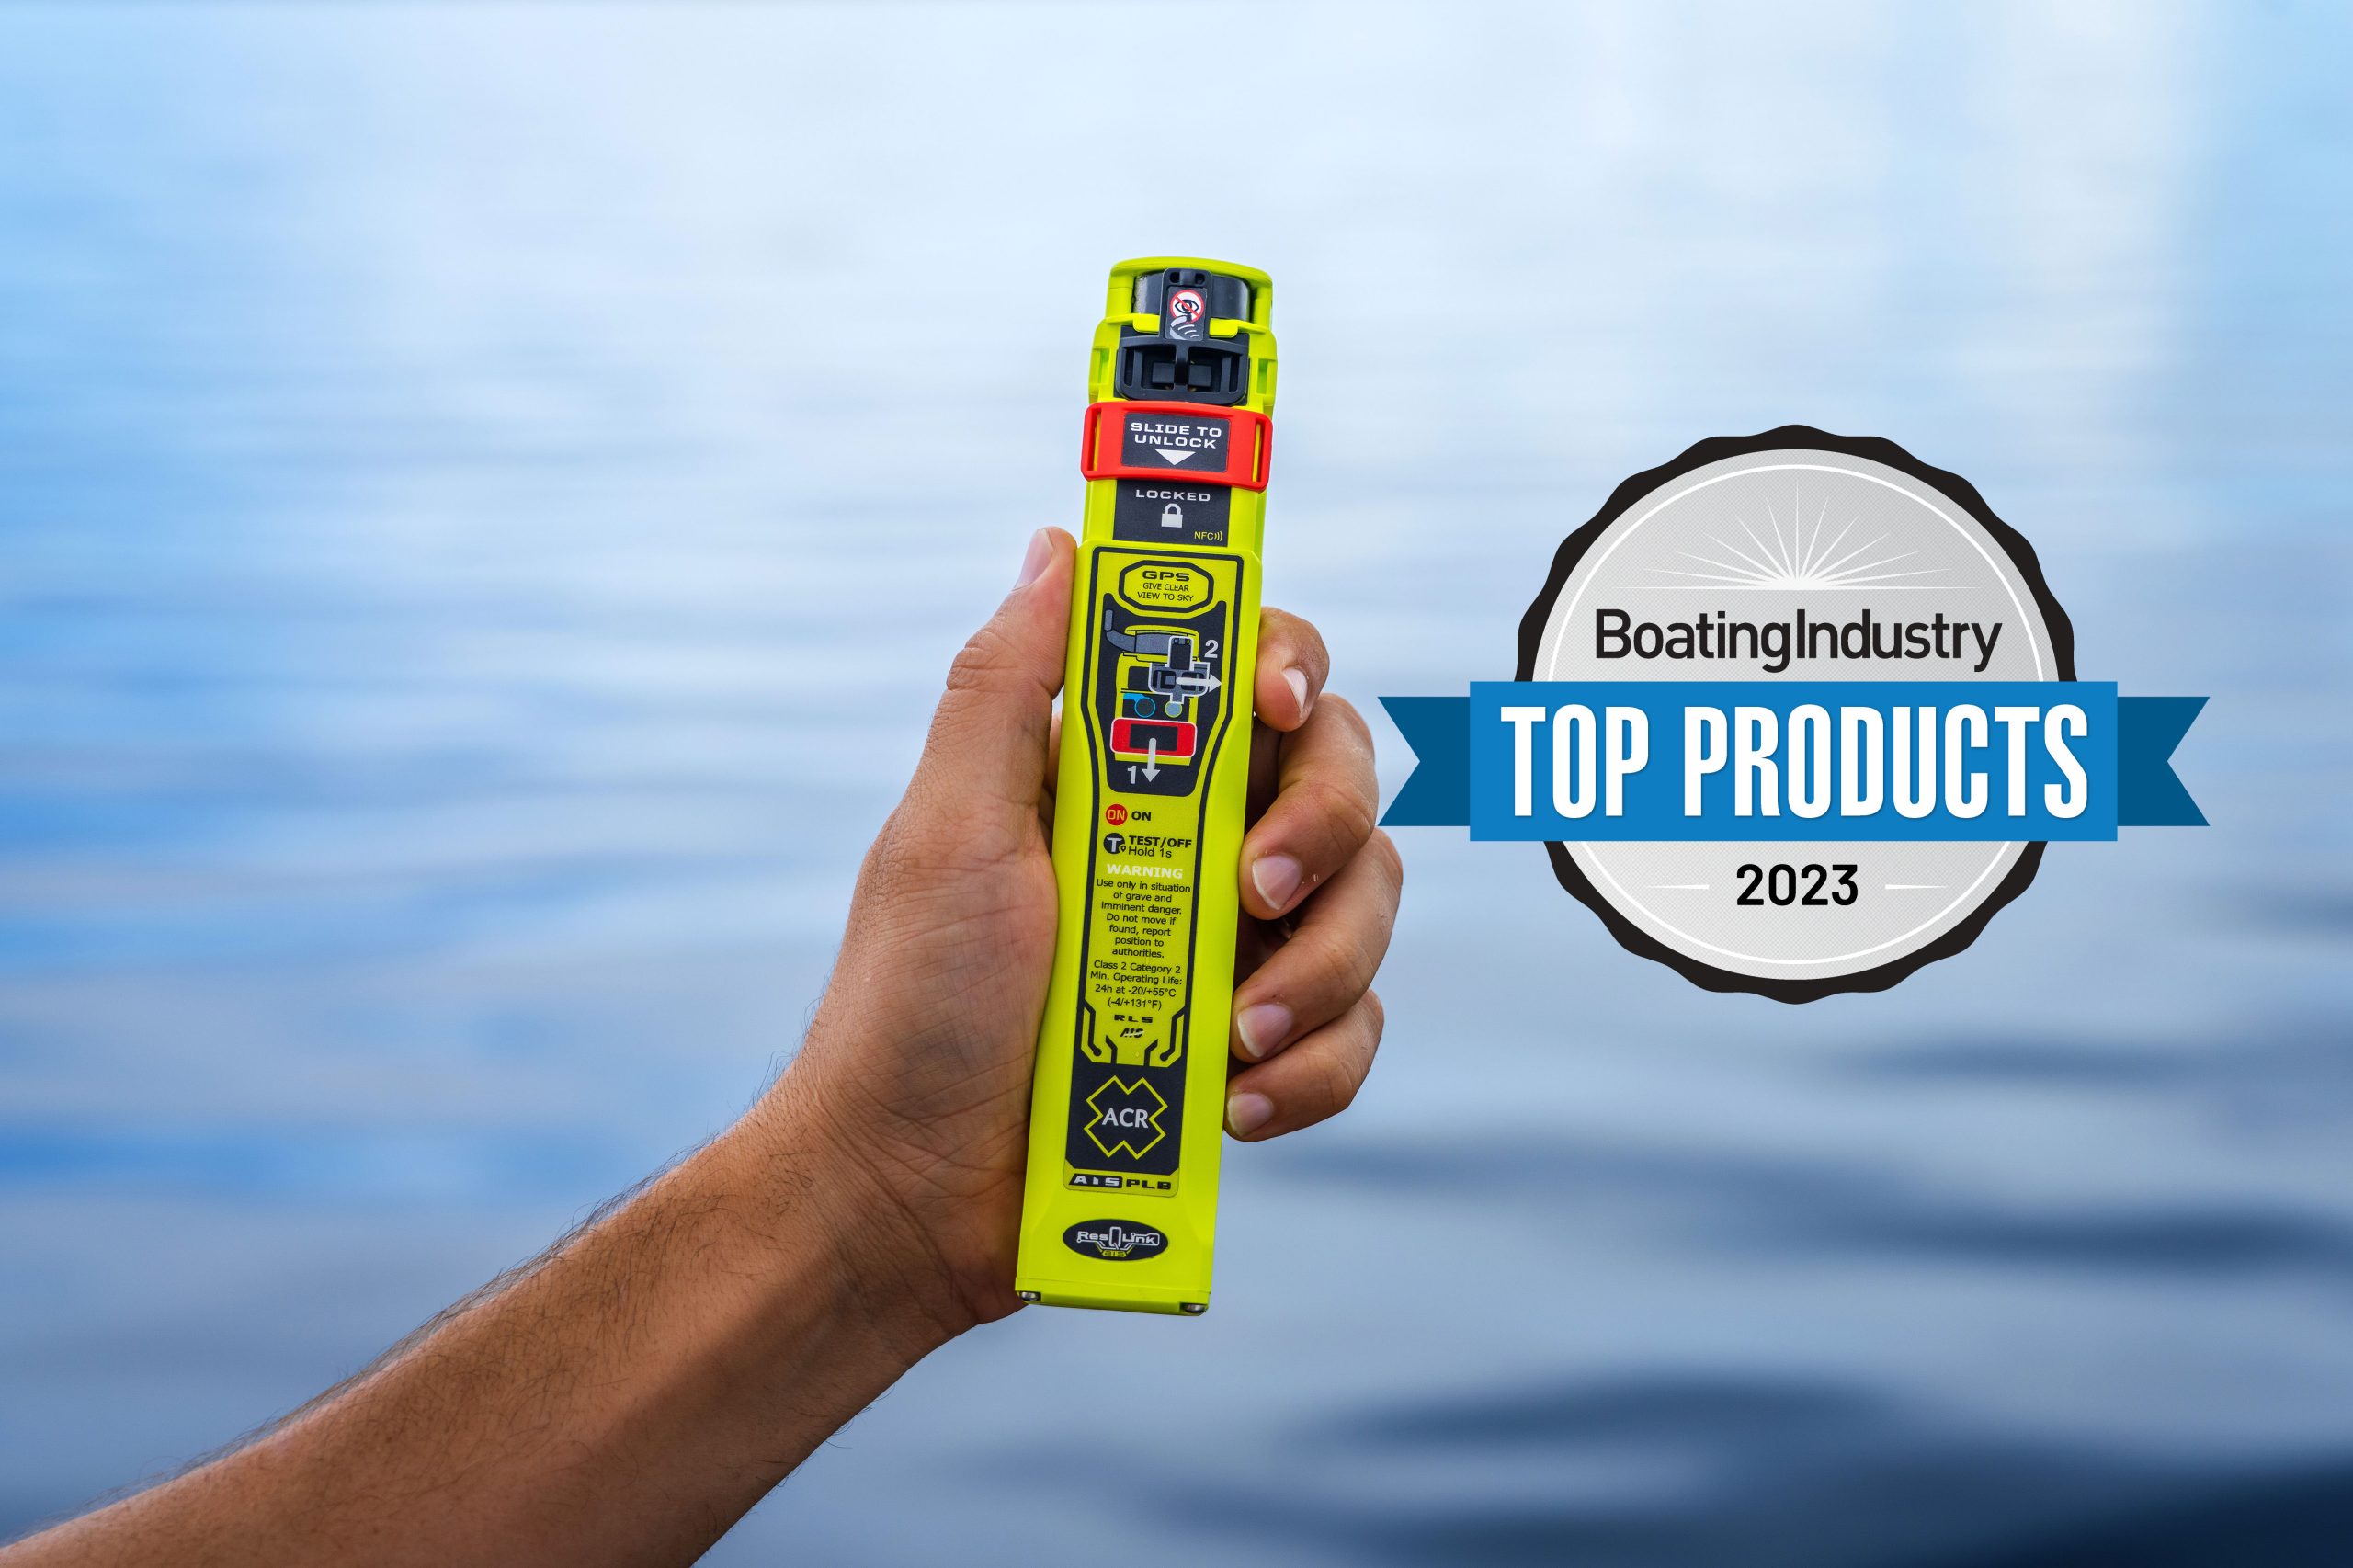 ACR Electronics ResQLink AIS Personal Locator Beacon Named 2023 Top Product by Boating Industry